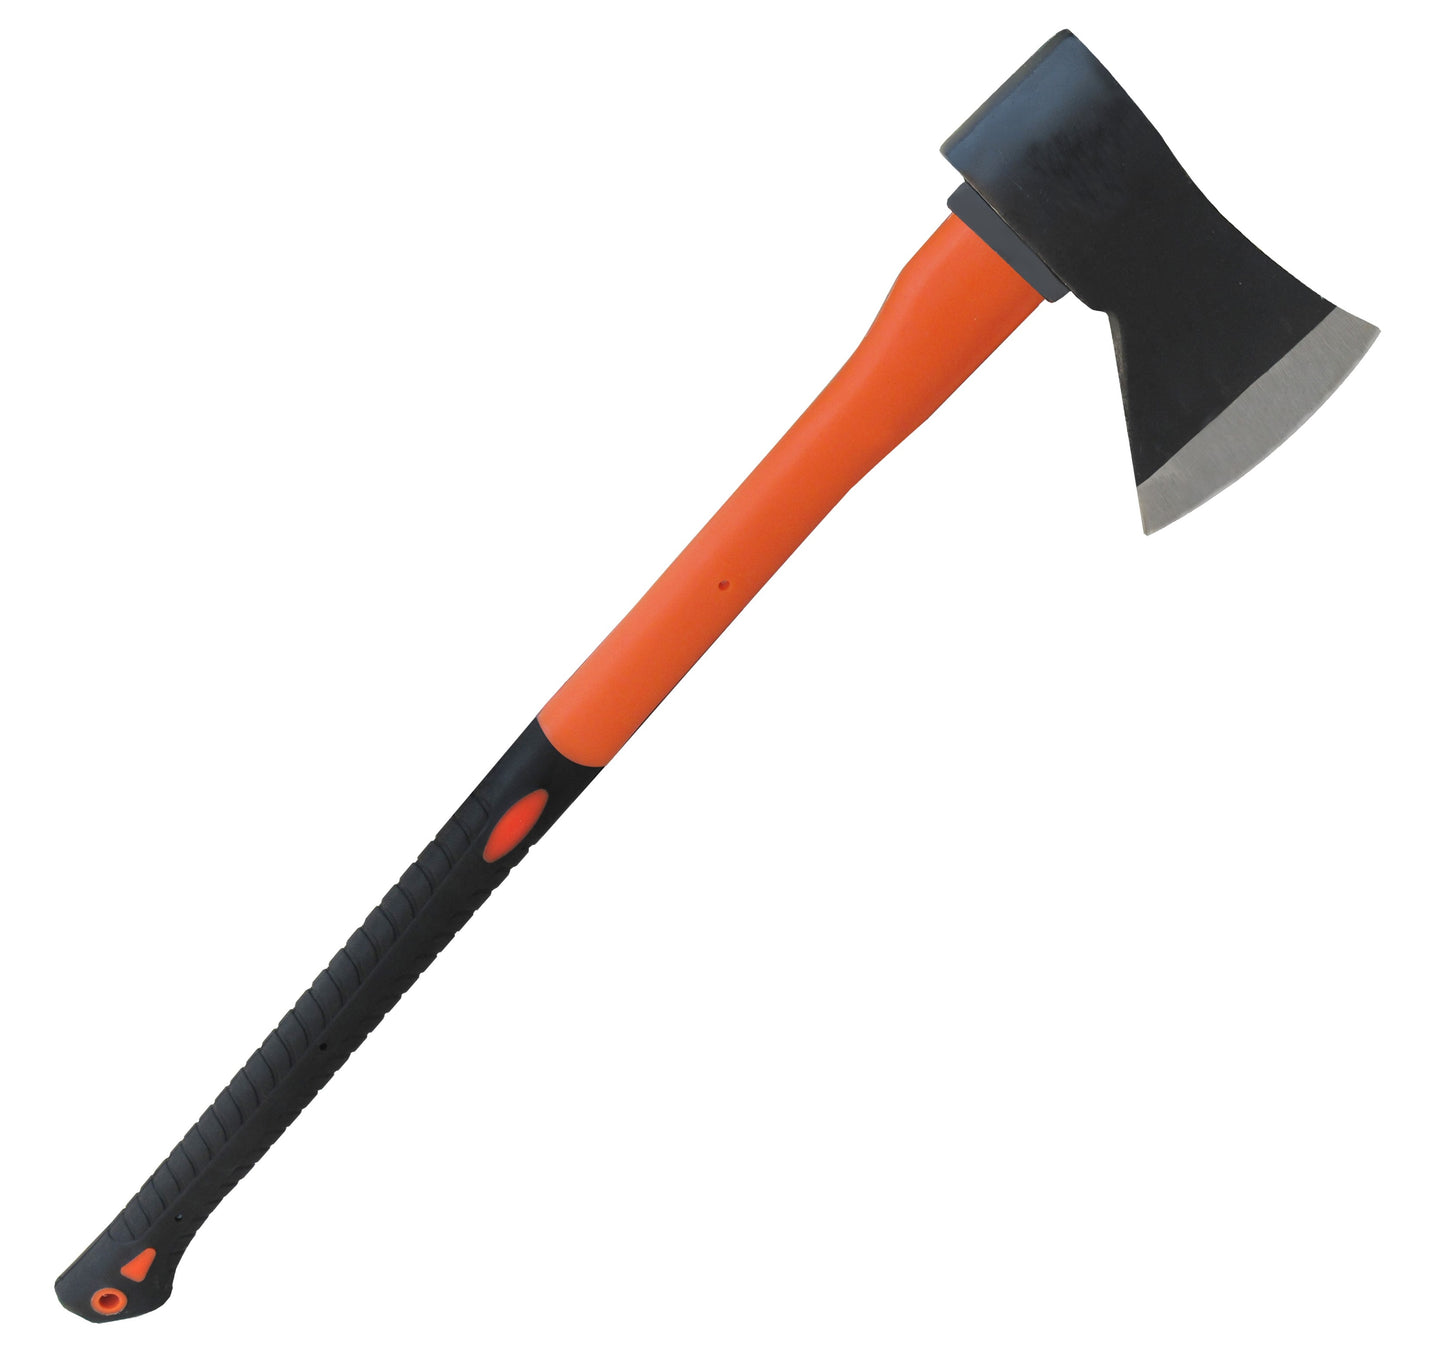 TABOR TOOLS 27 Inch Chopping Axe With Fiberglass Handle and Anti-Slip Grip